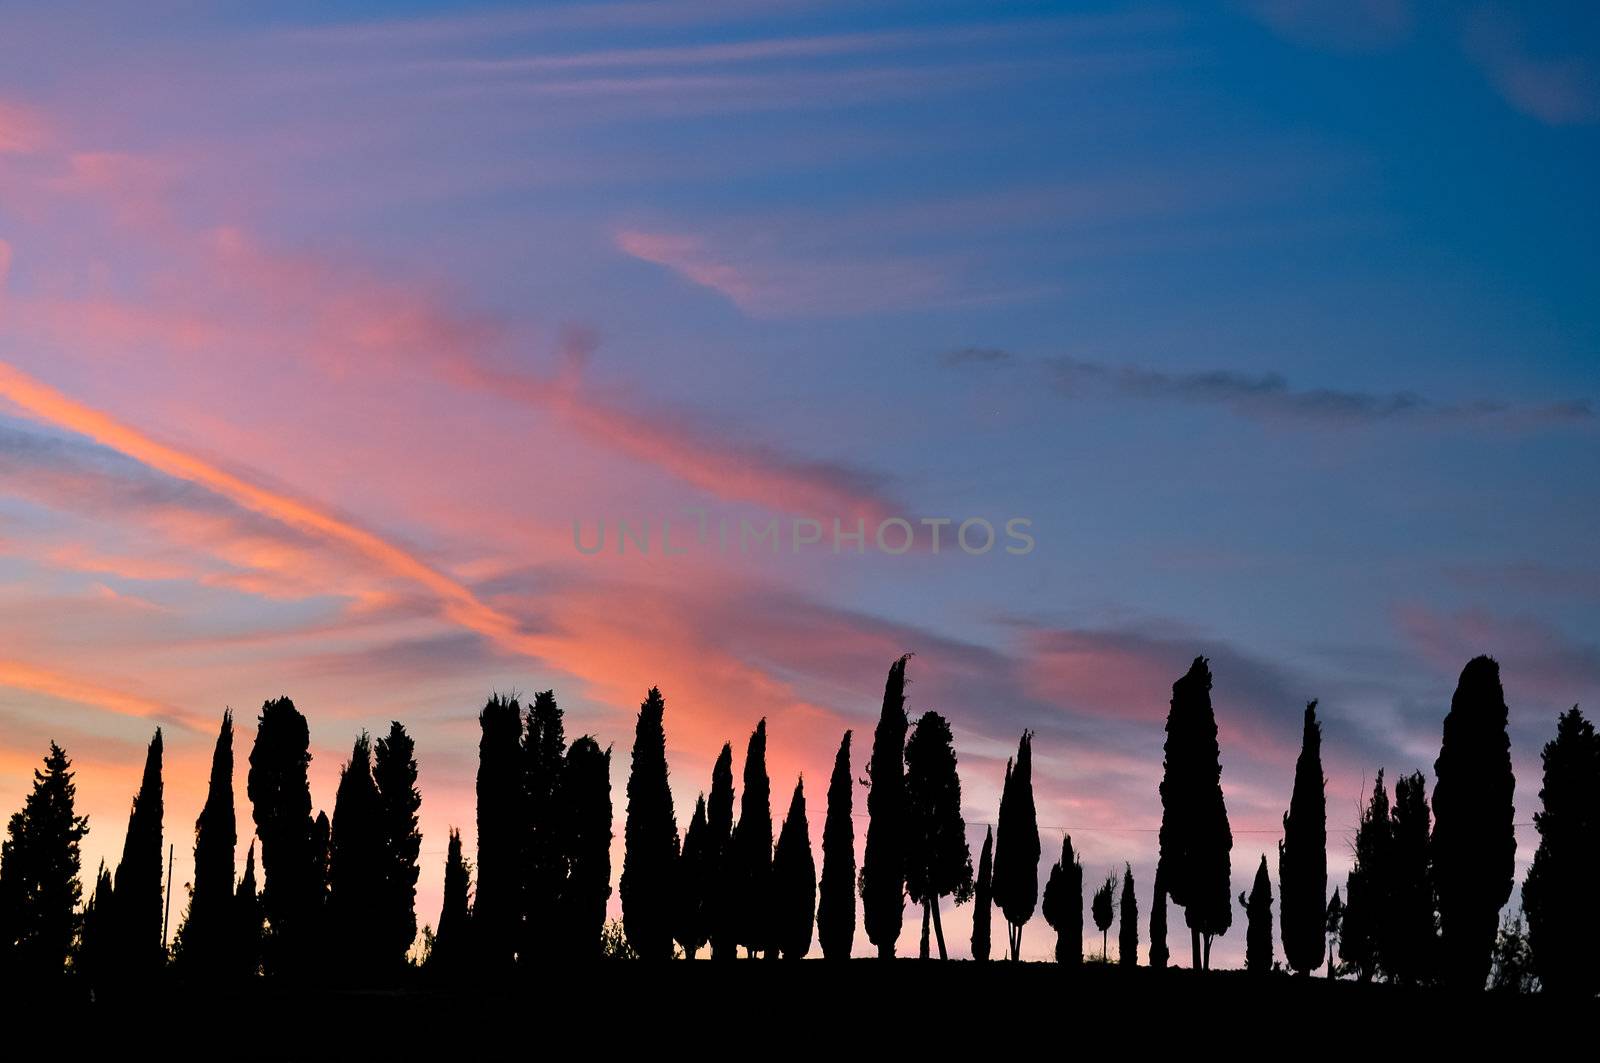 Tuscan trees silhouettes at sunset with purple and blue sky and clouds